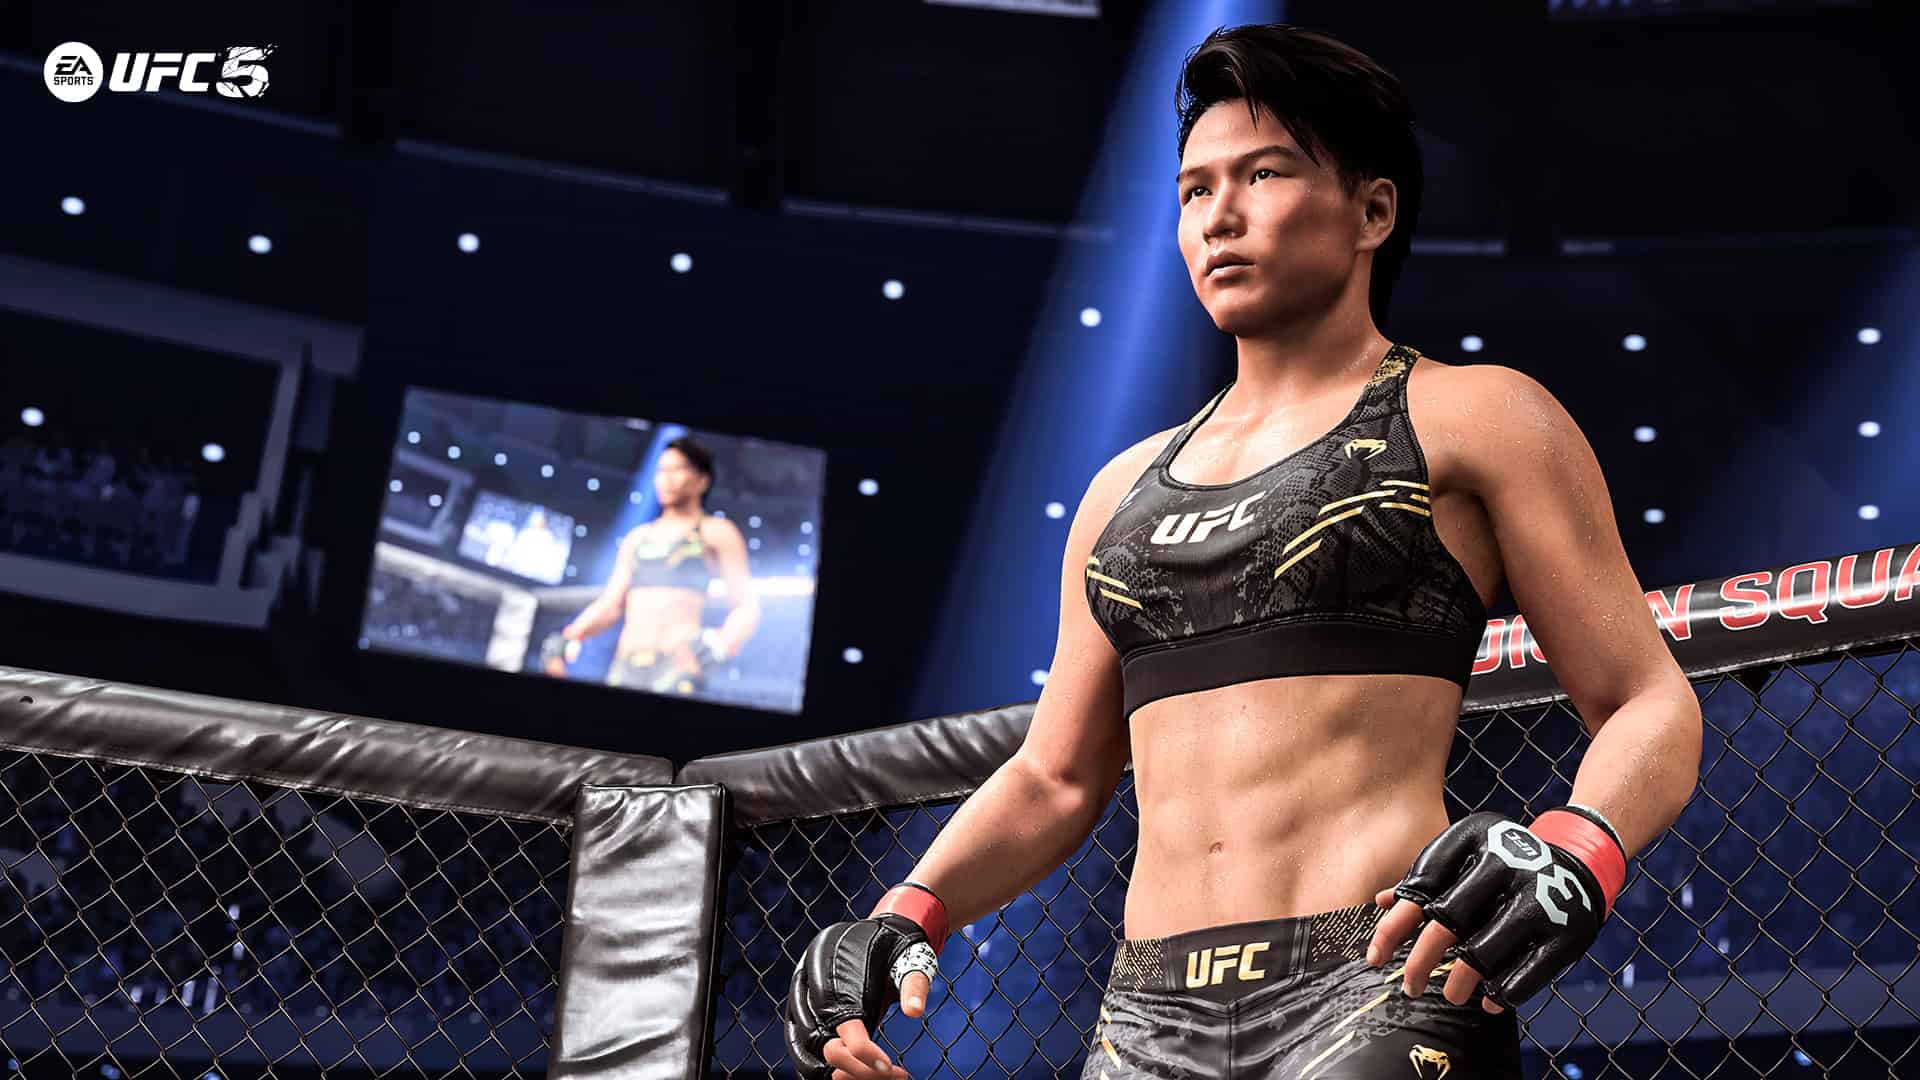 A female fighter in UFC, a cage-based video game.